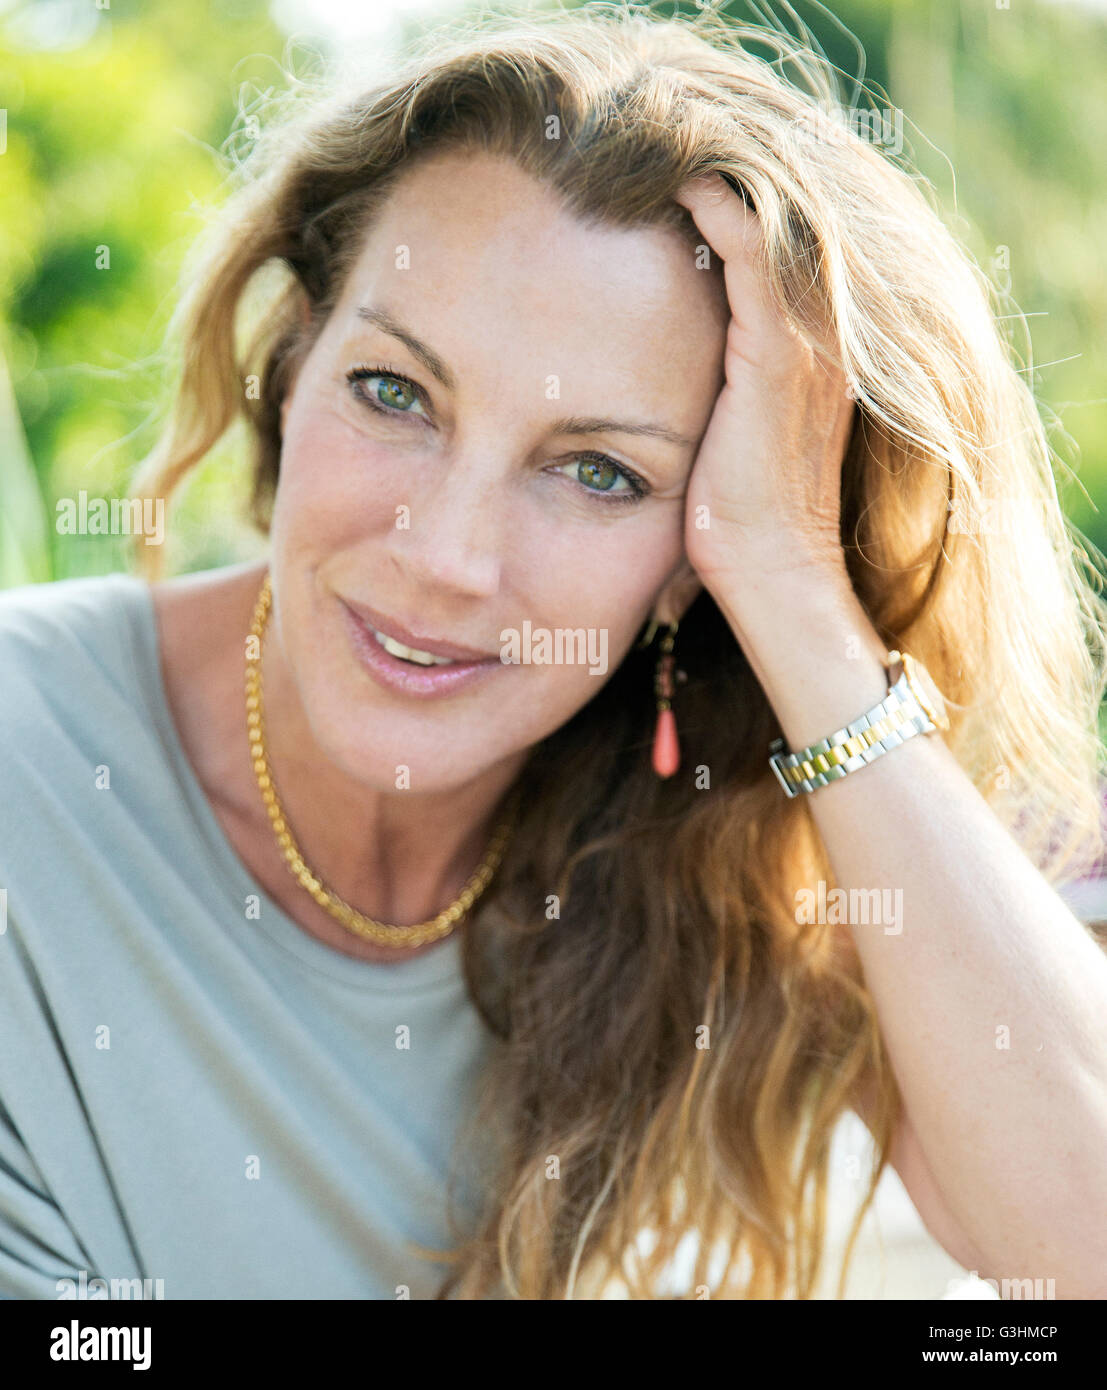 Close up portrait of beautiful mature woman with long blond hair Stock Photo